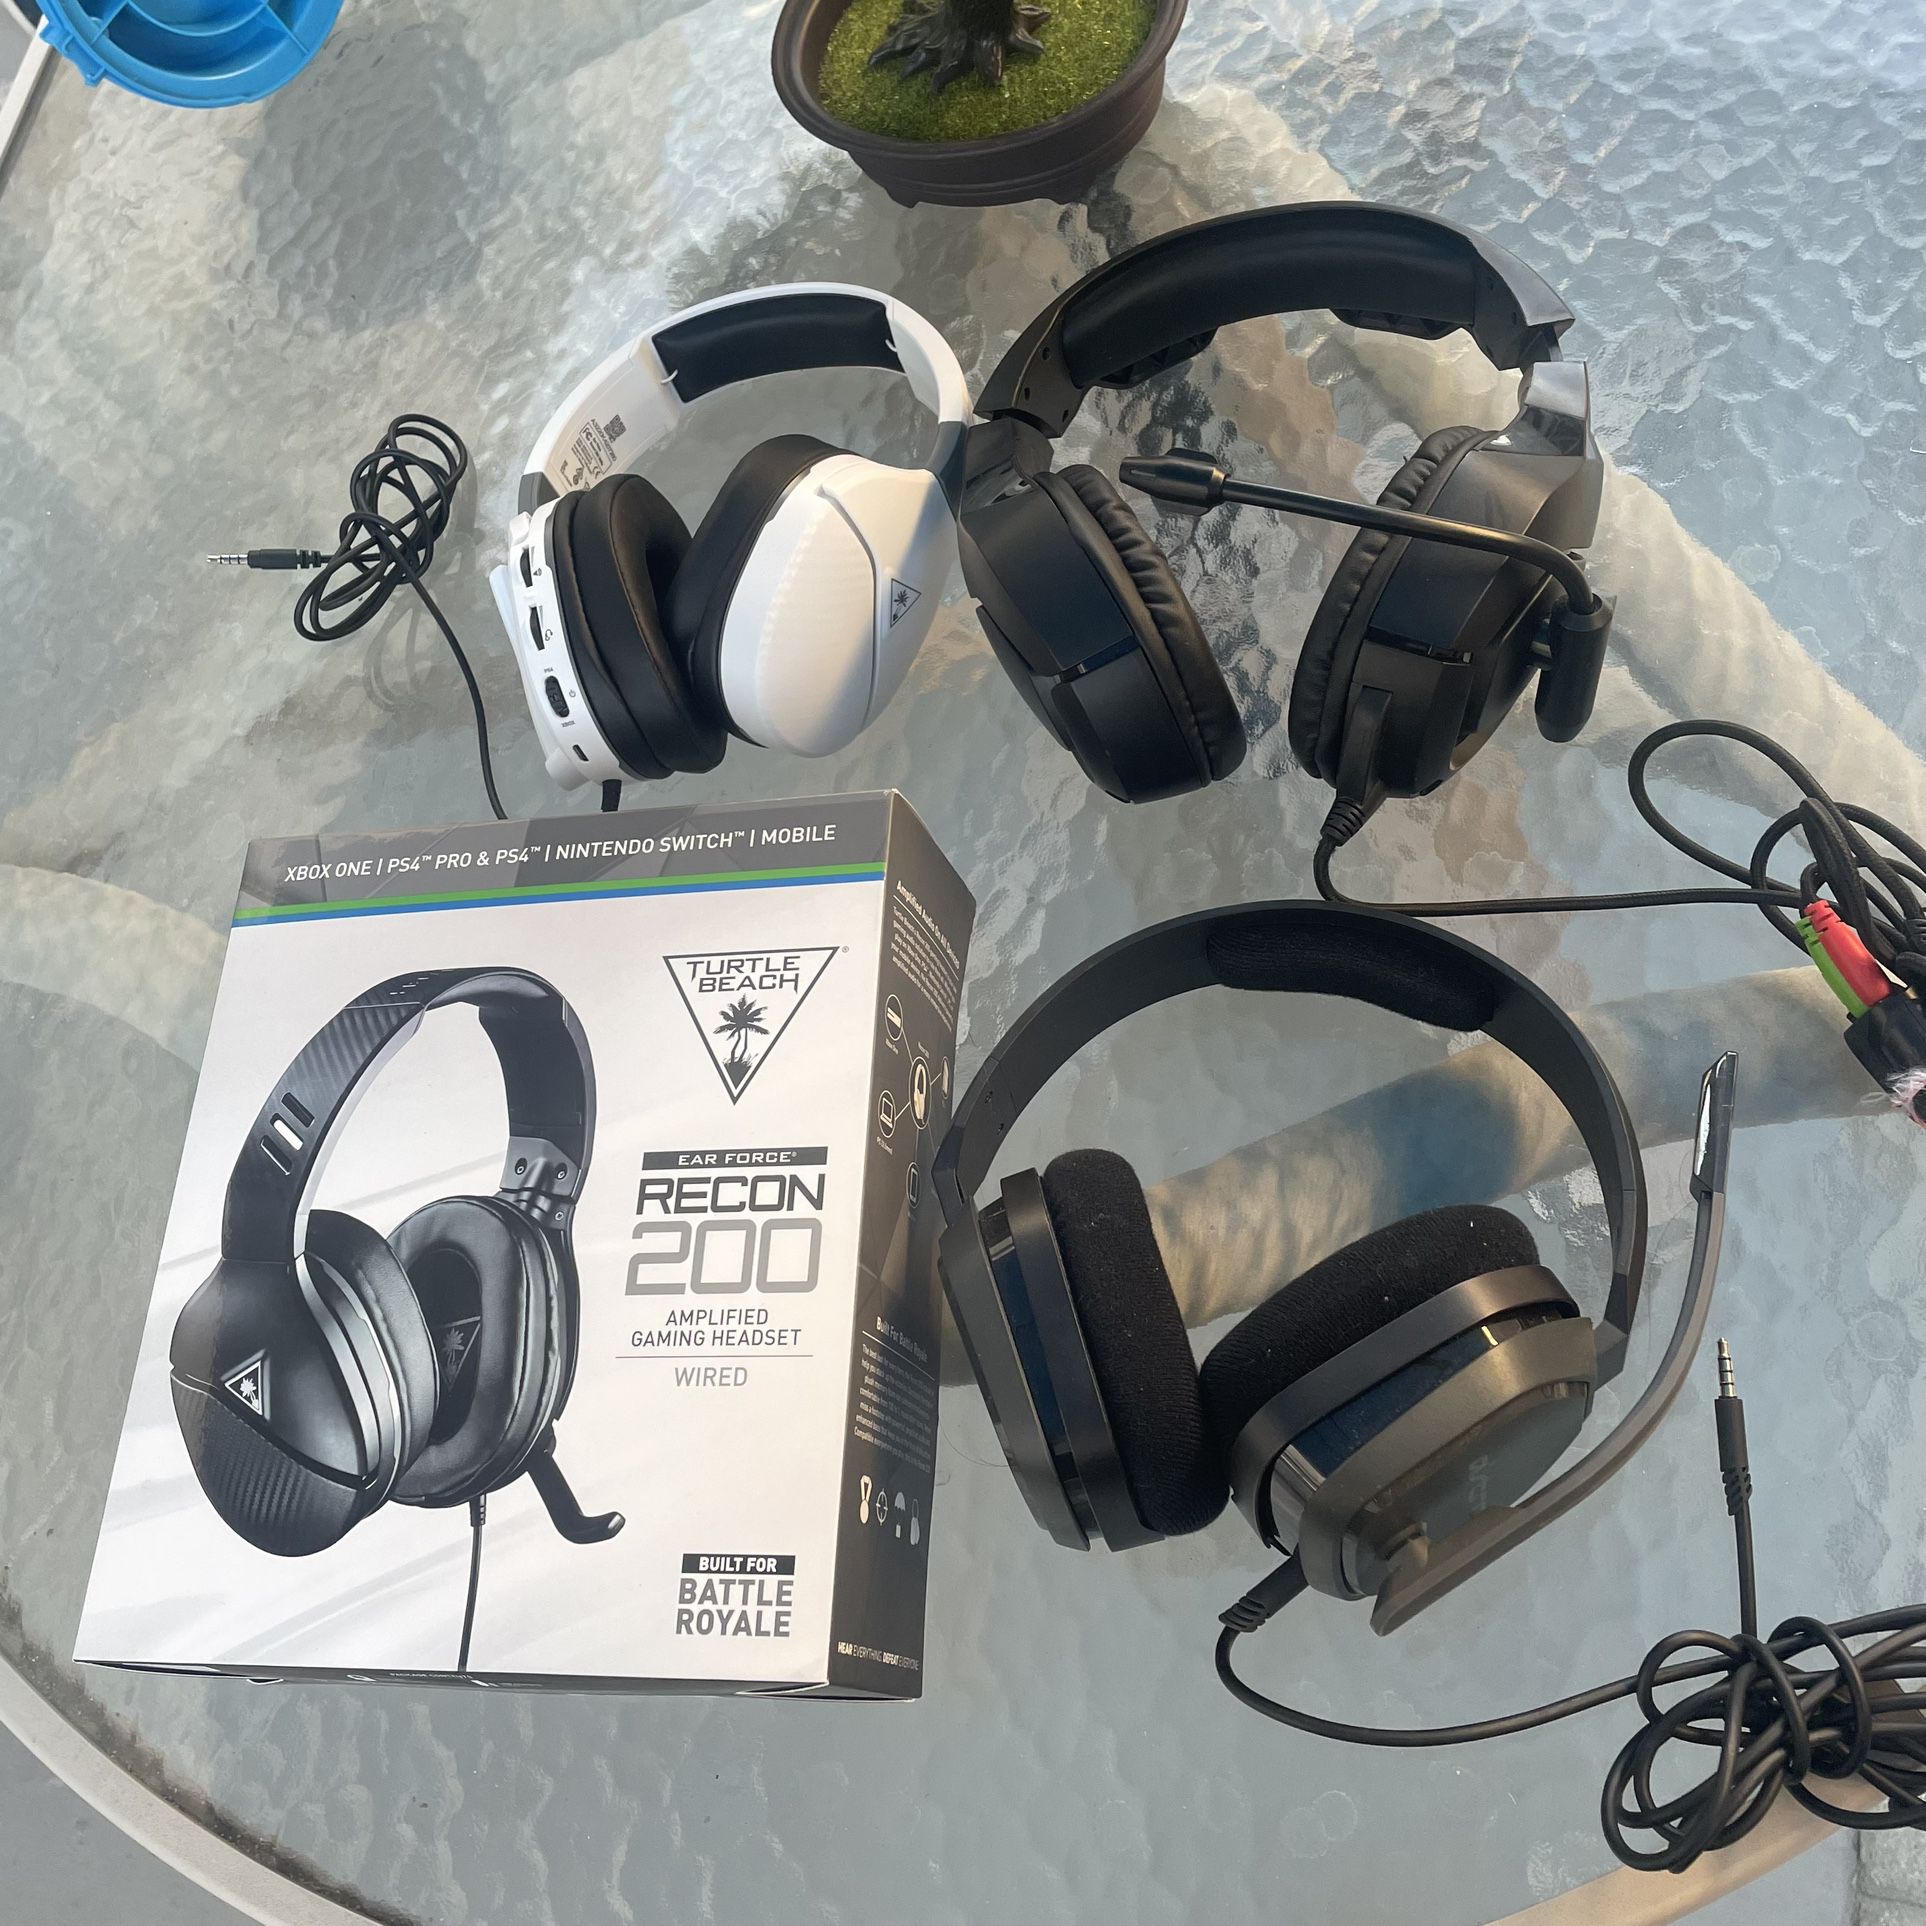 Wired Gaming Headsets For Only $19 Each